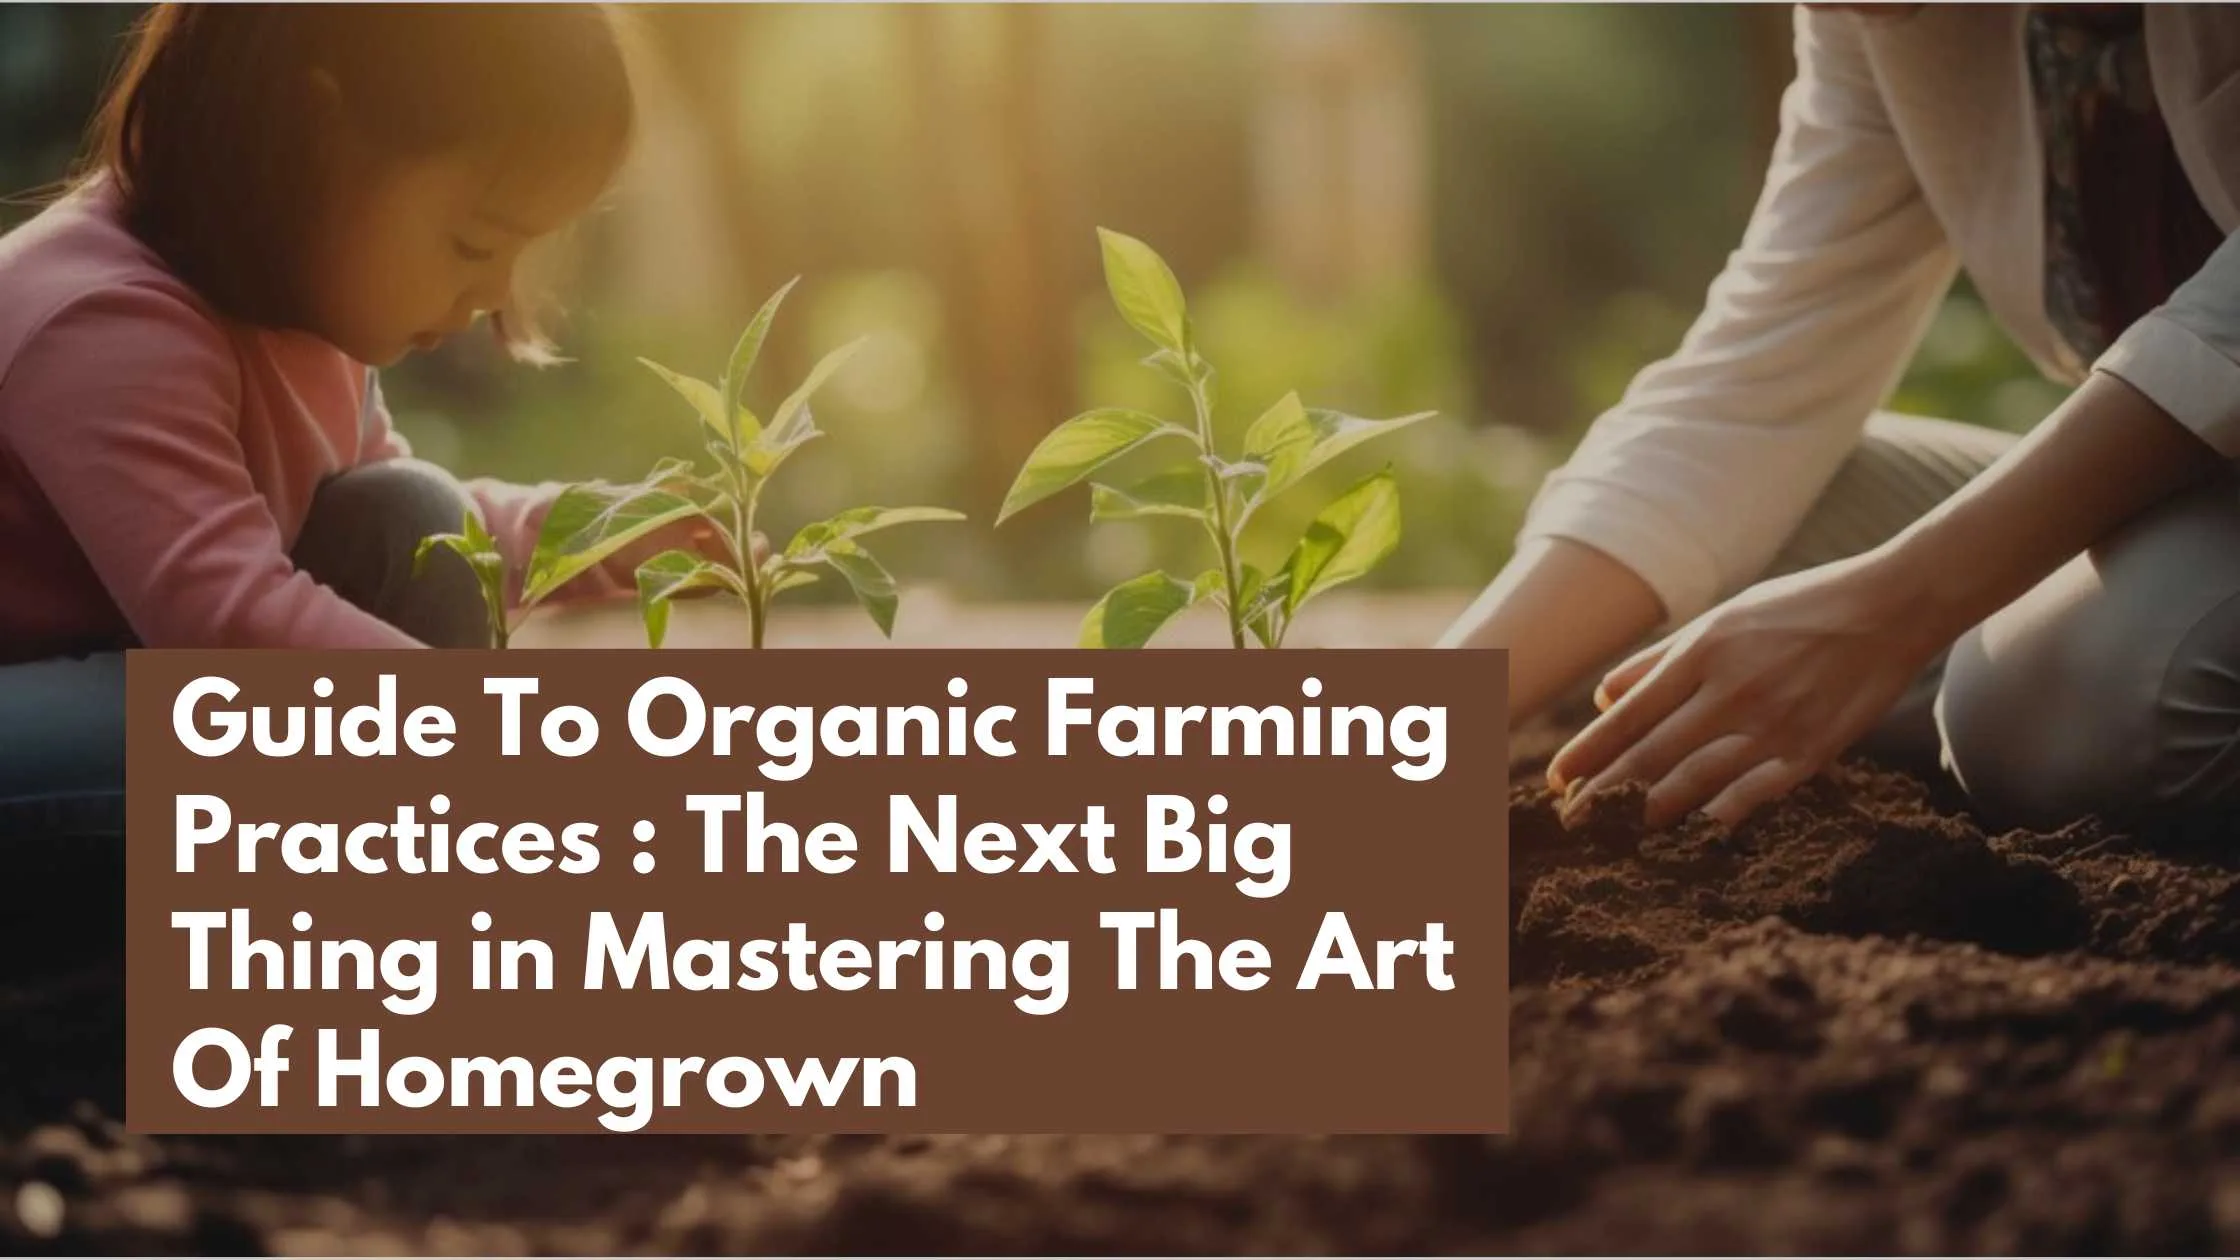 Guide to Organic Farming Practices